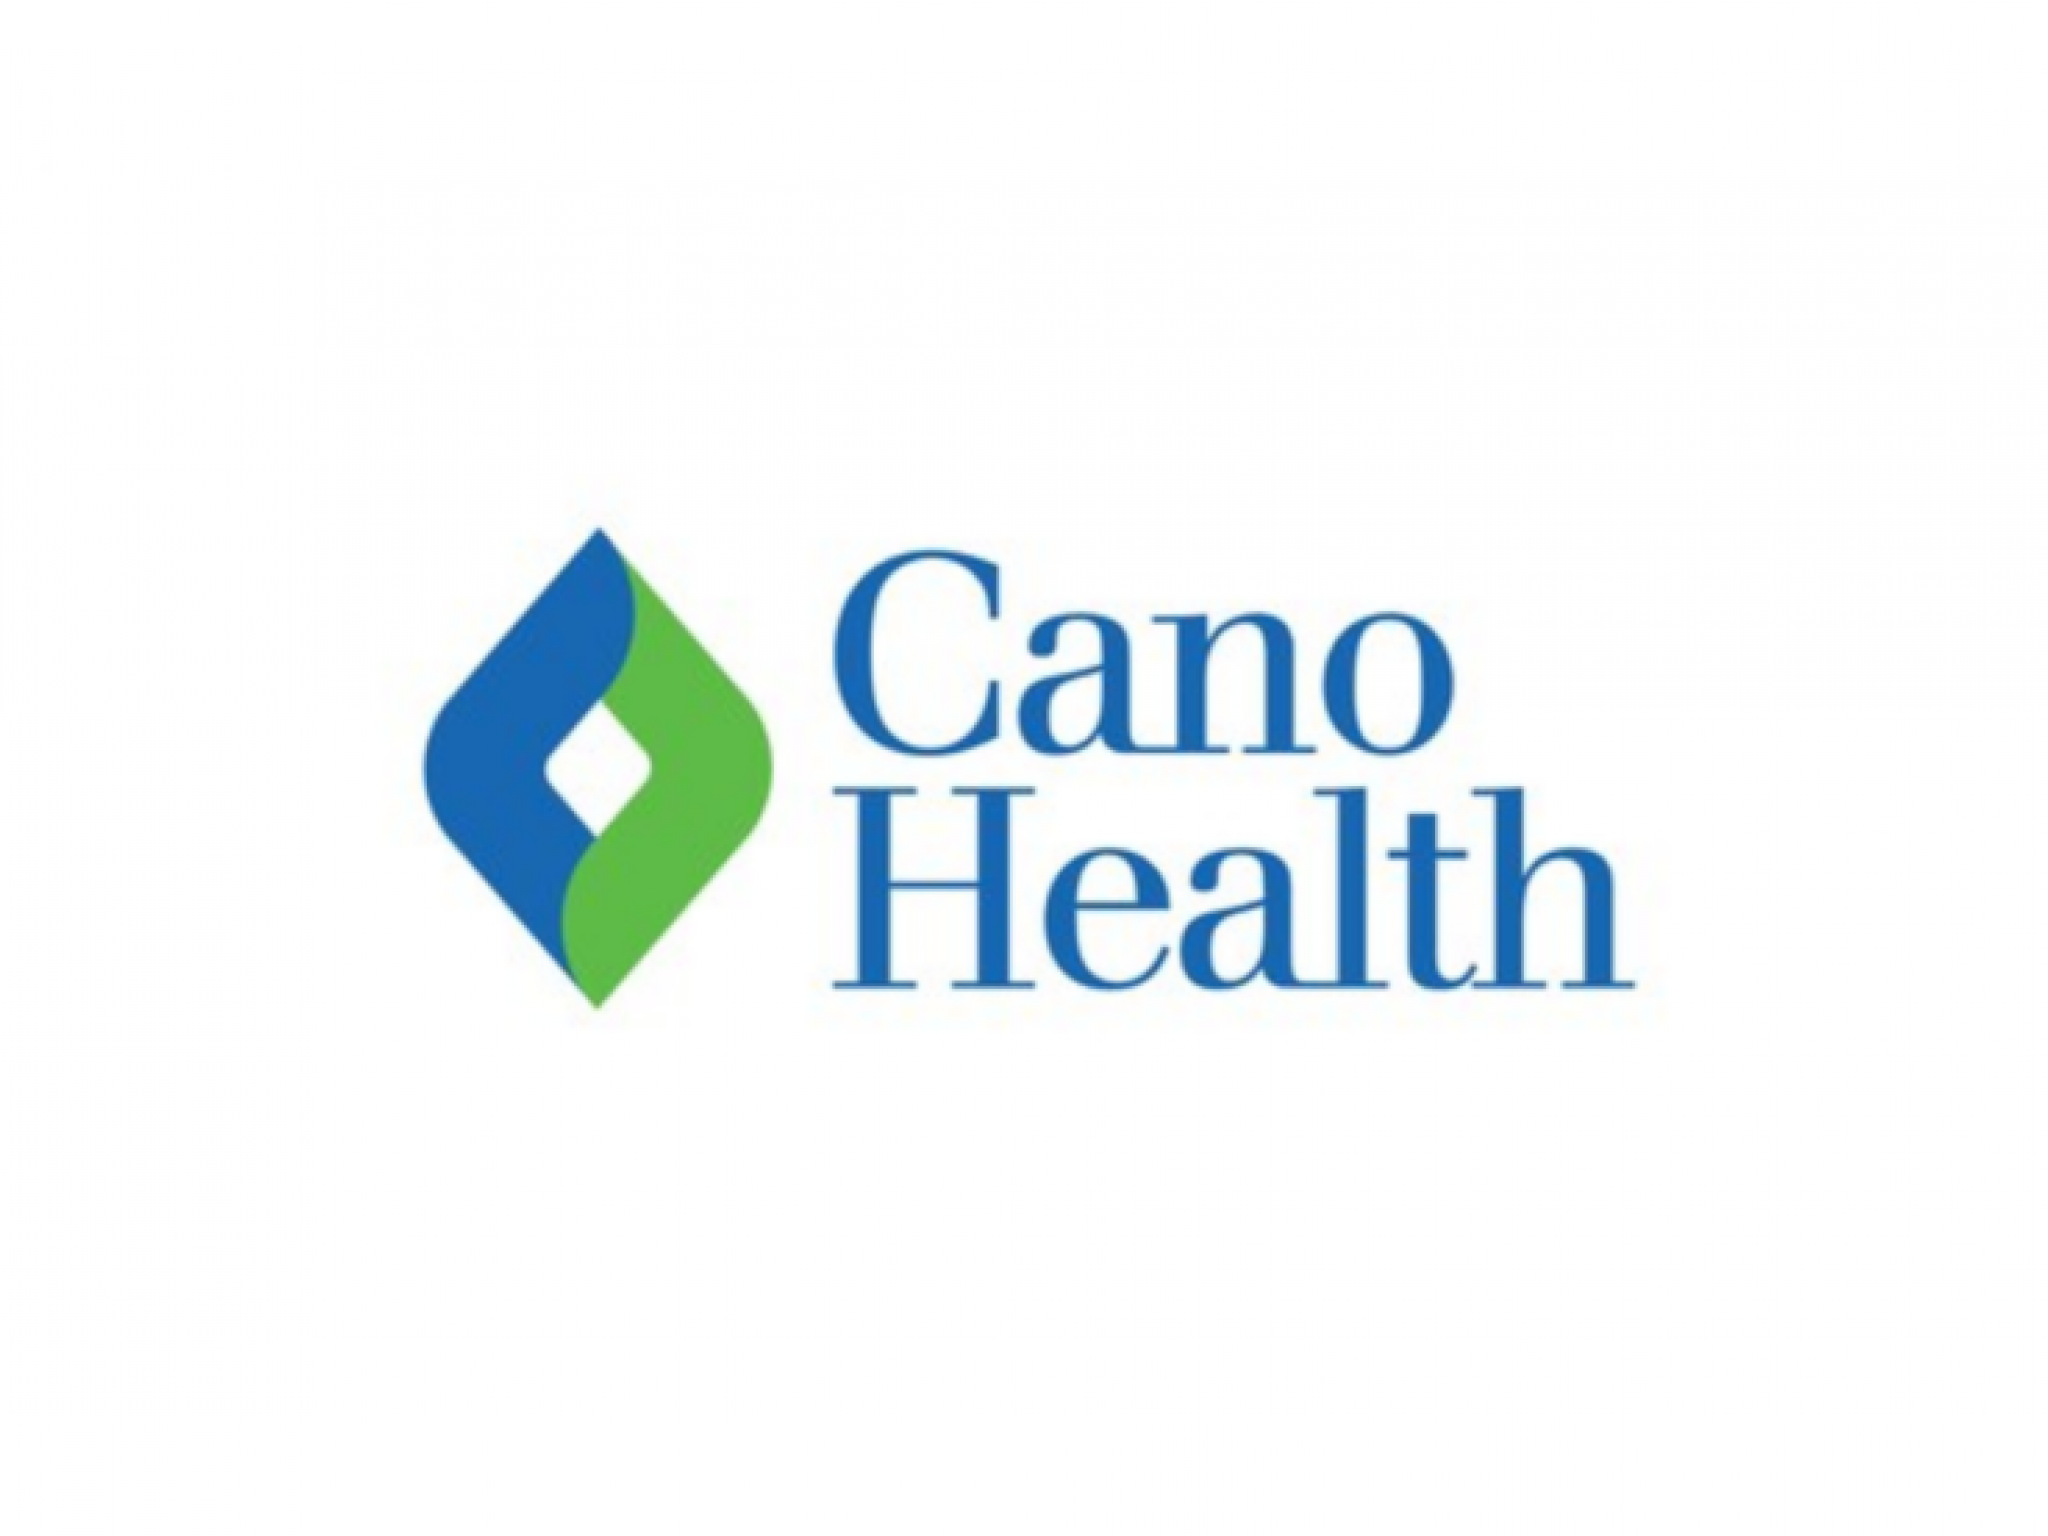  why-is-primary-care-provider-cano-health-stock-trading-lower-today 